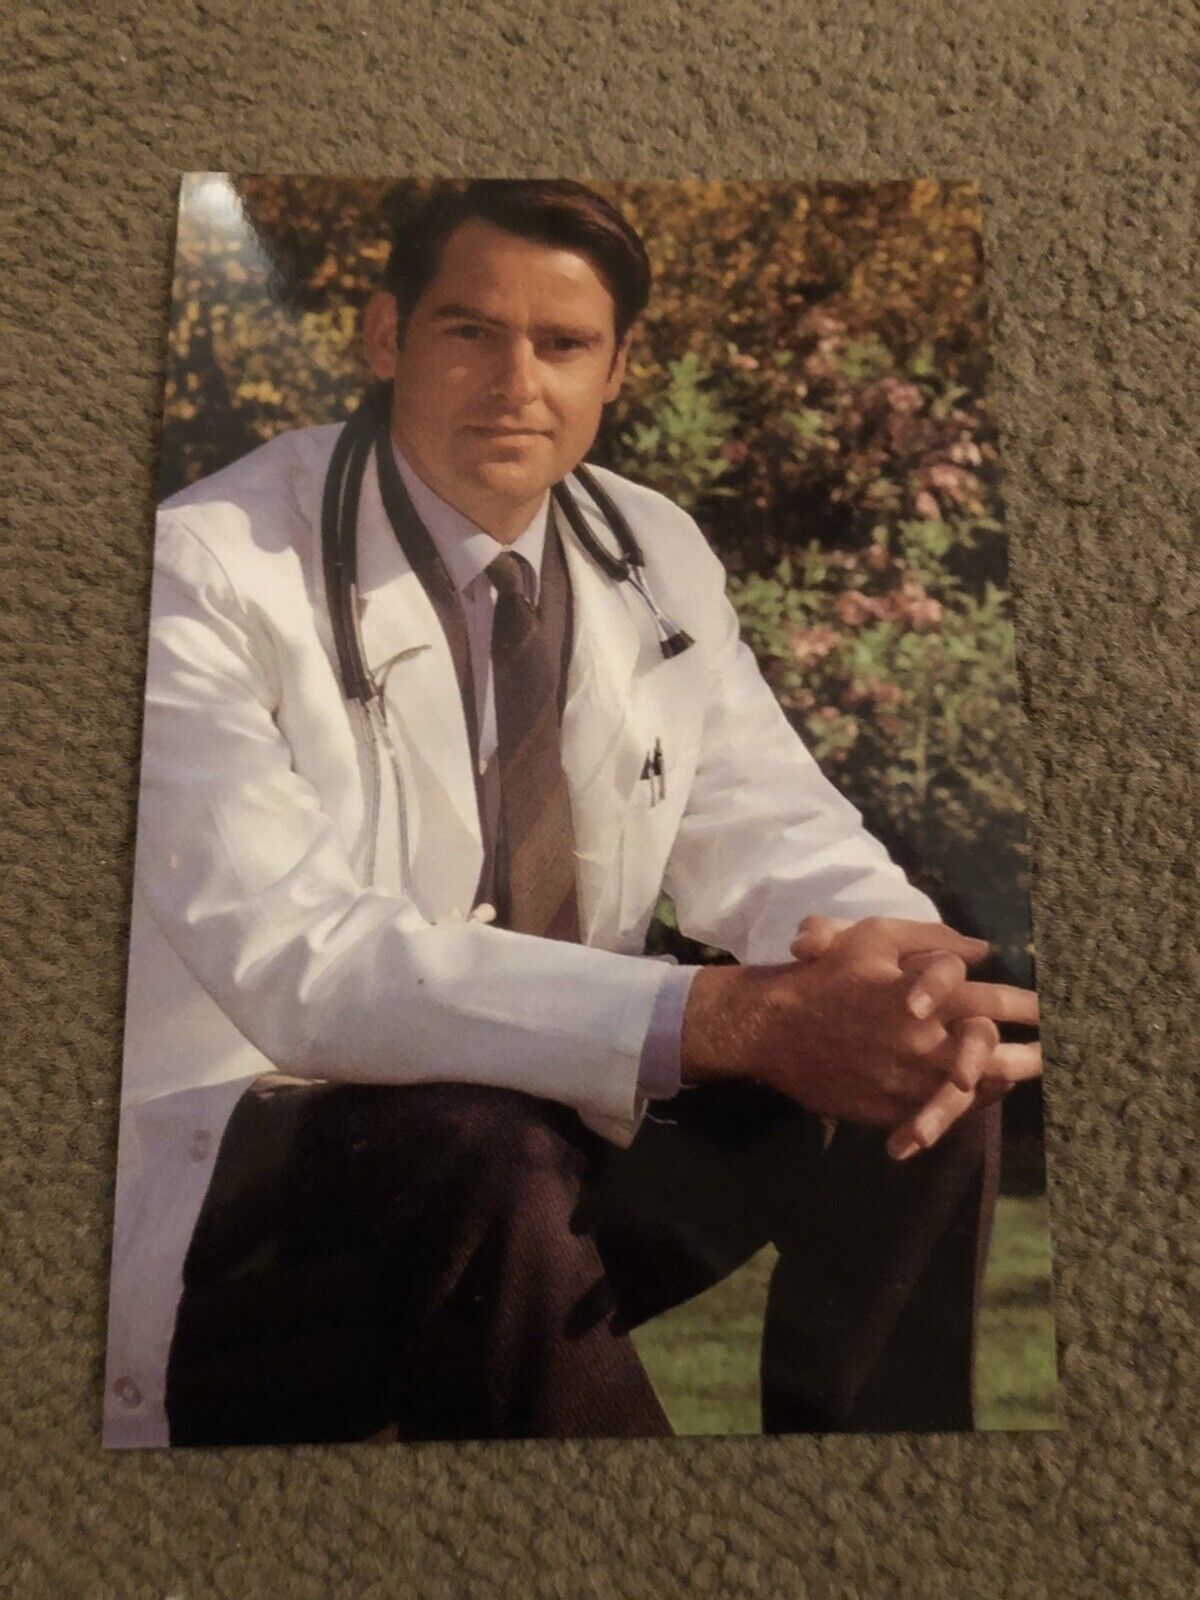 DAVID MICHAELS (HEARTBEAT) UNSIGNED Photo Poster painting- 6x4”